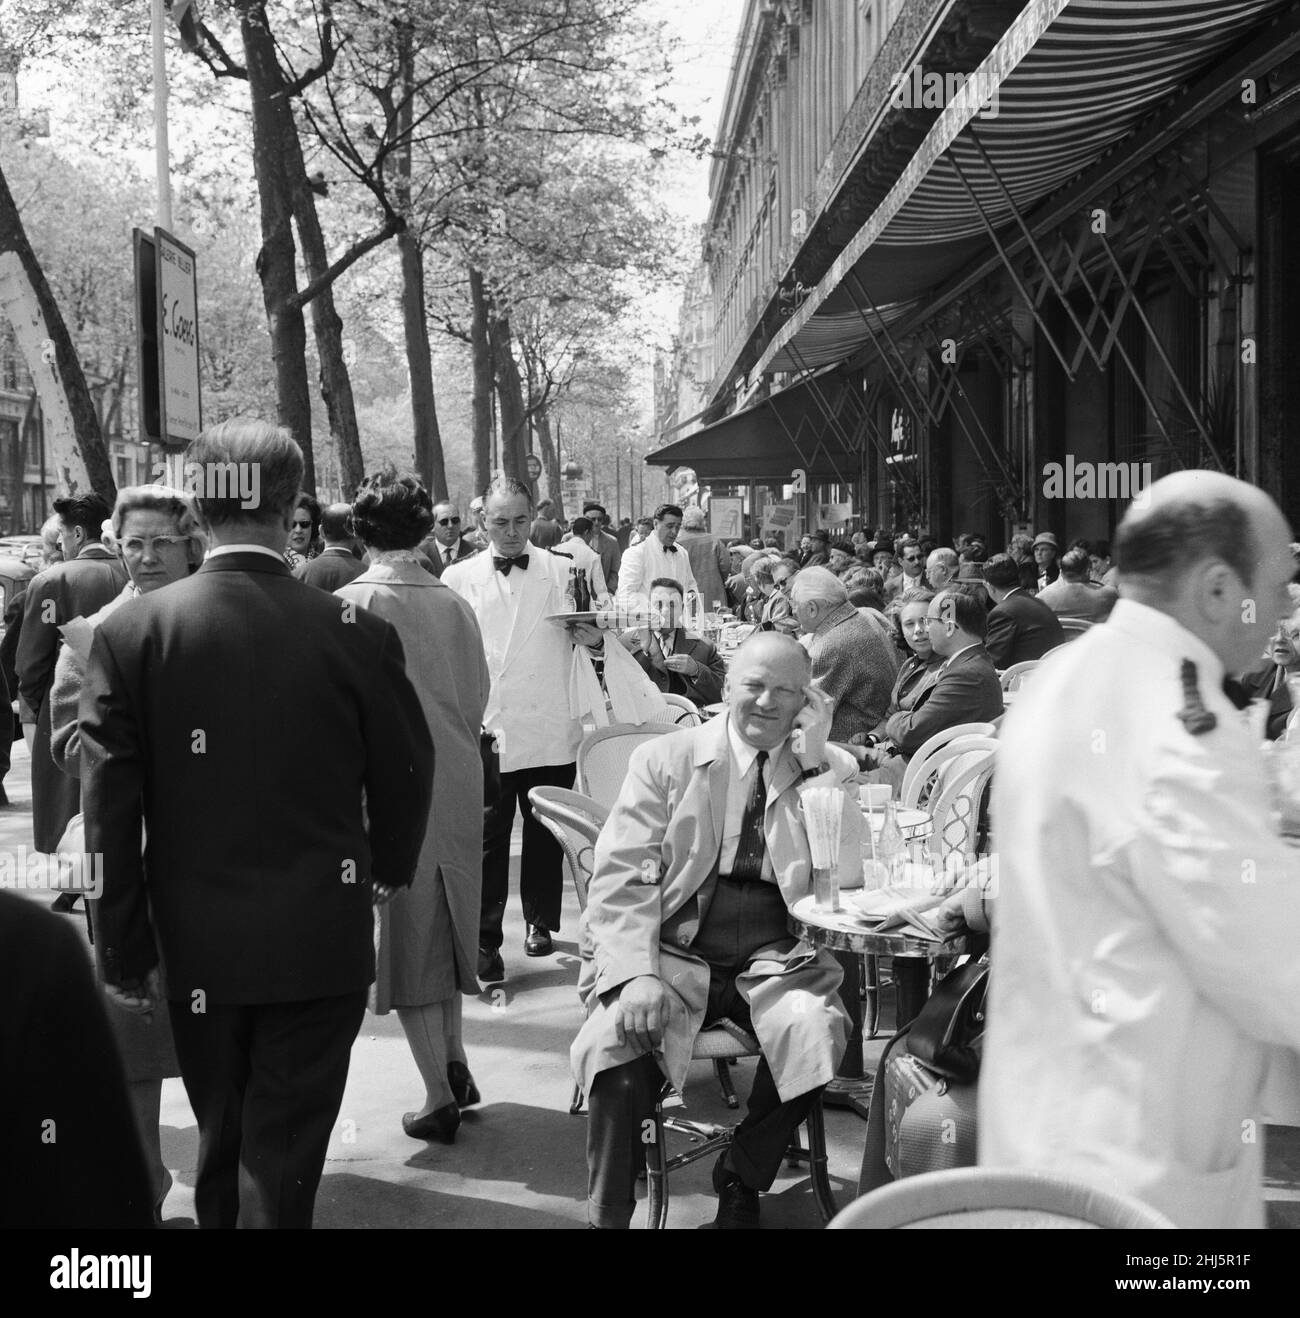 Cafe scenes in central Paris, France. Picture taken 13th May 1960, ahead of the  Big Four  East-West summit on 17th May, which would end in failure due to disagreements over the U2 spy plane which was shot down a couple of weeks earlier. Stock Photo